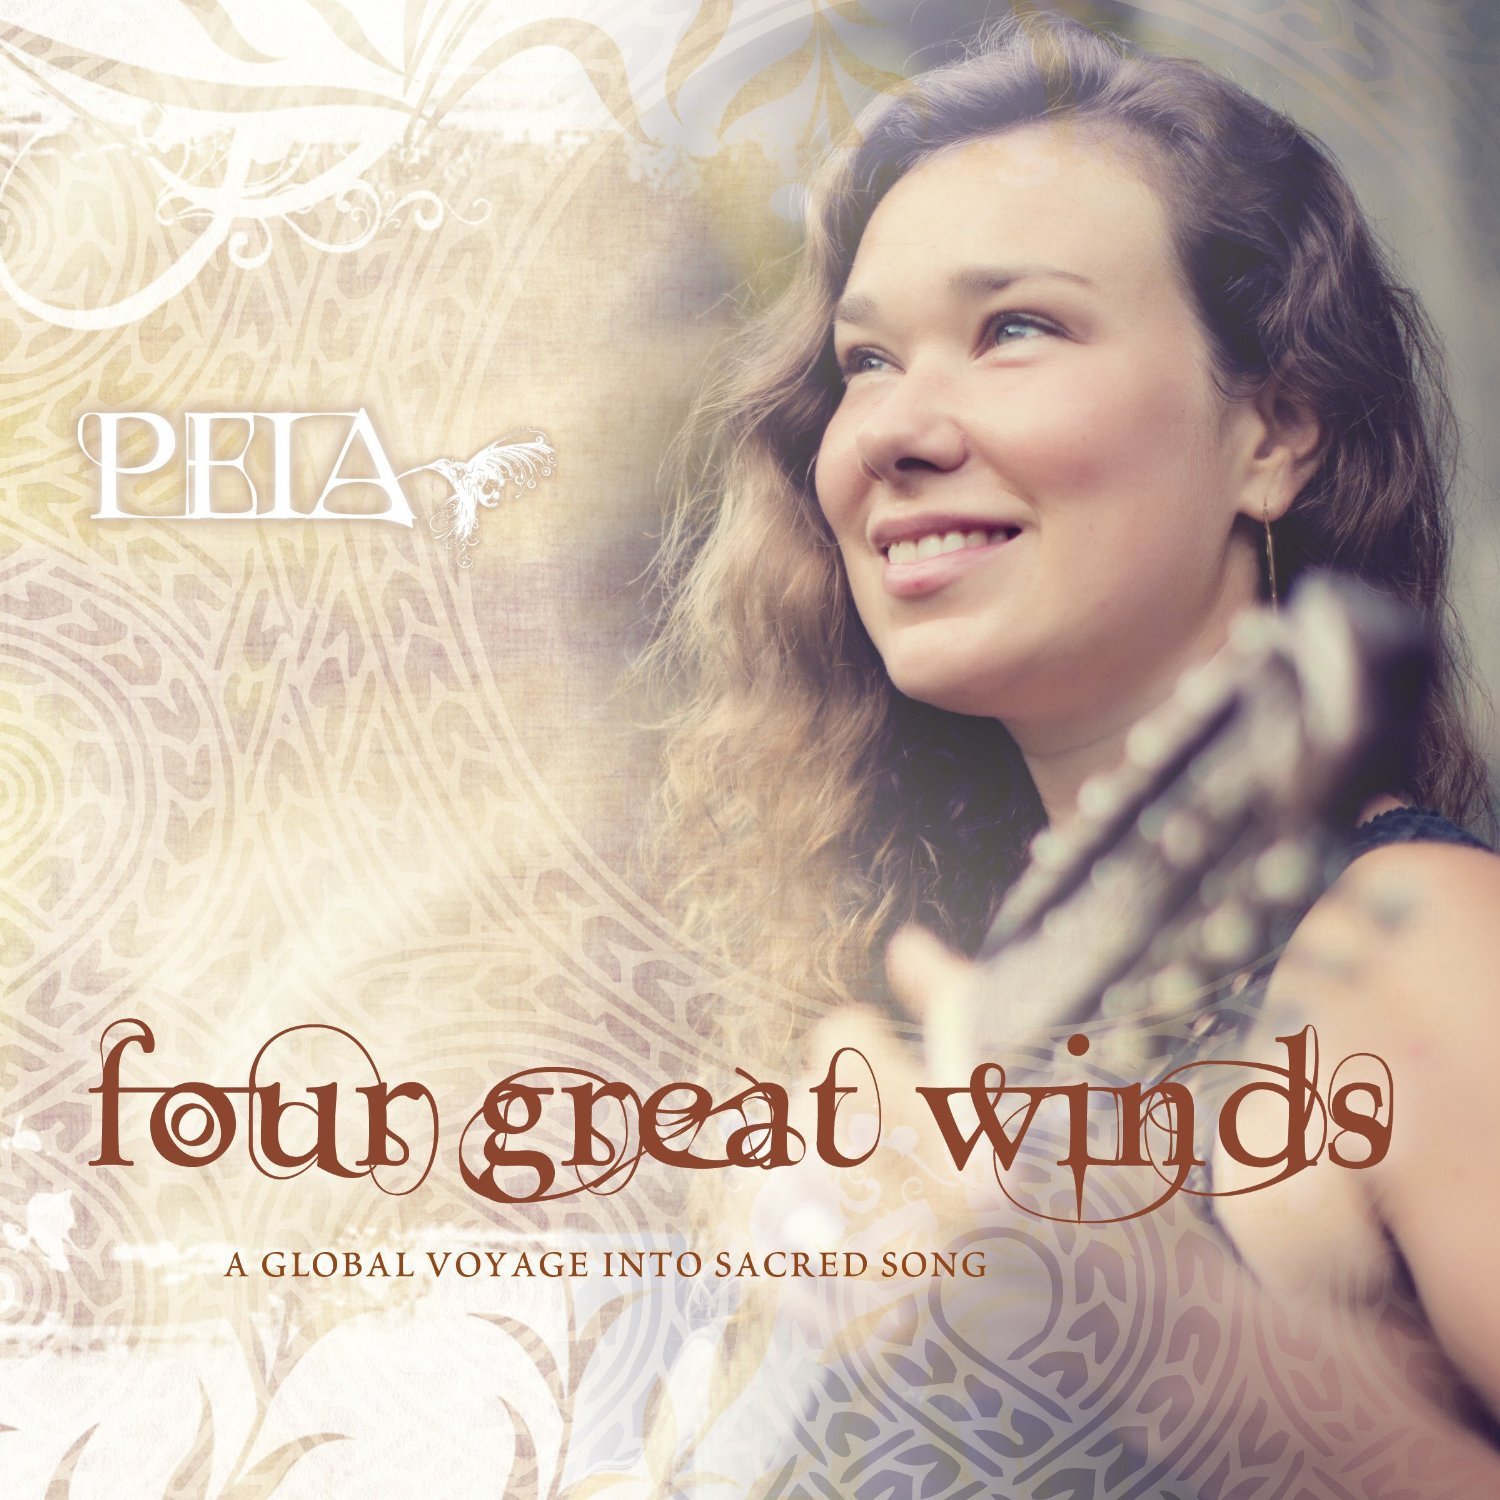 PEIA - Four Great Winds cover 